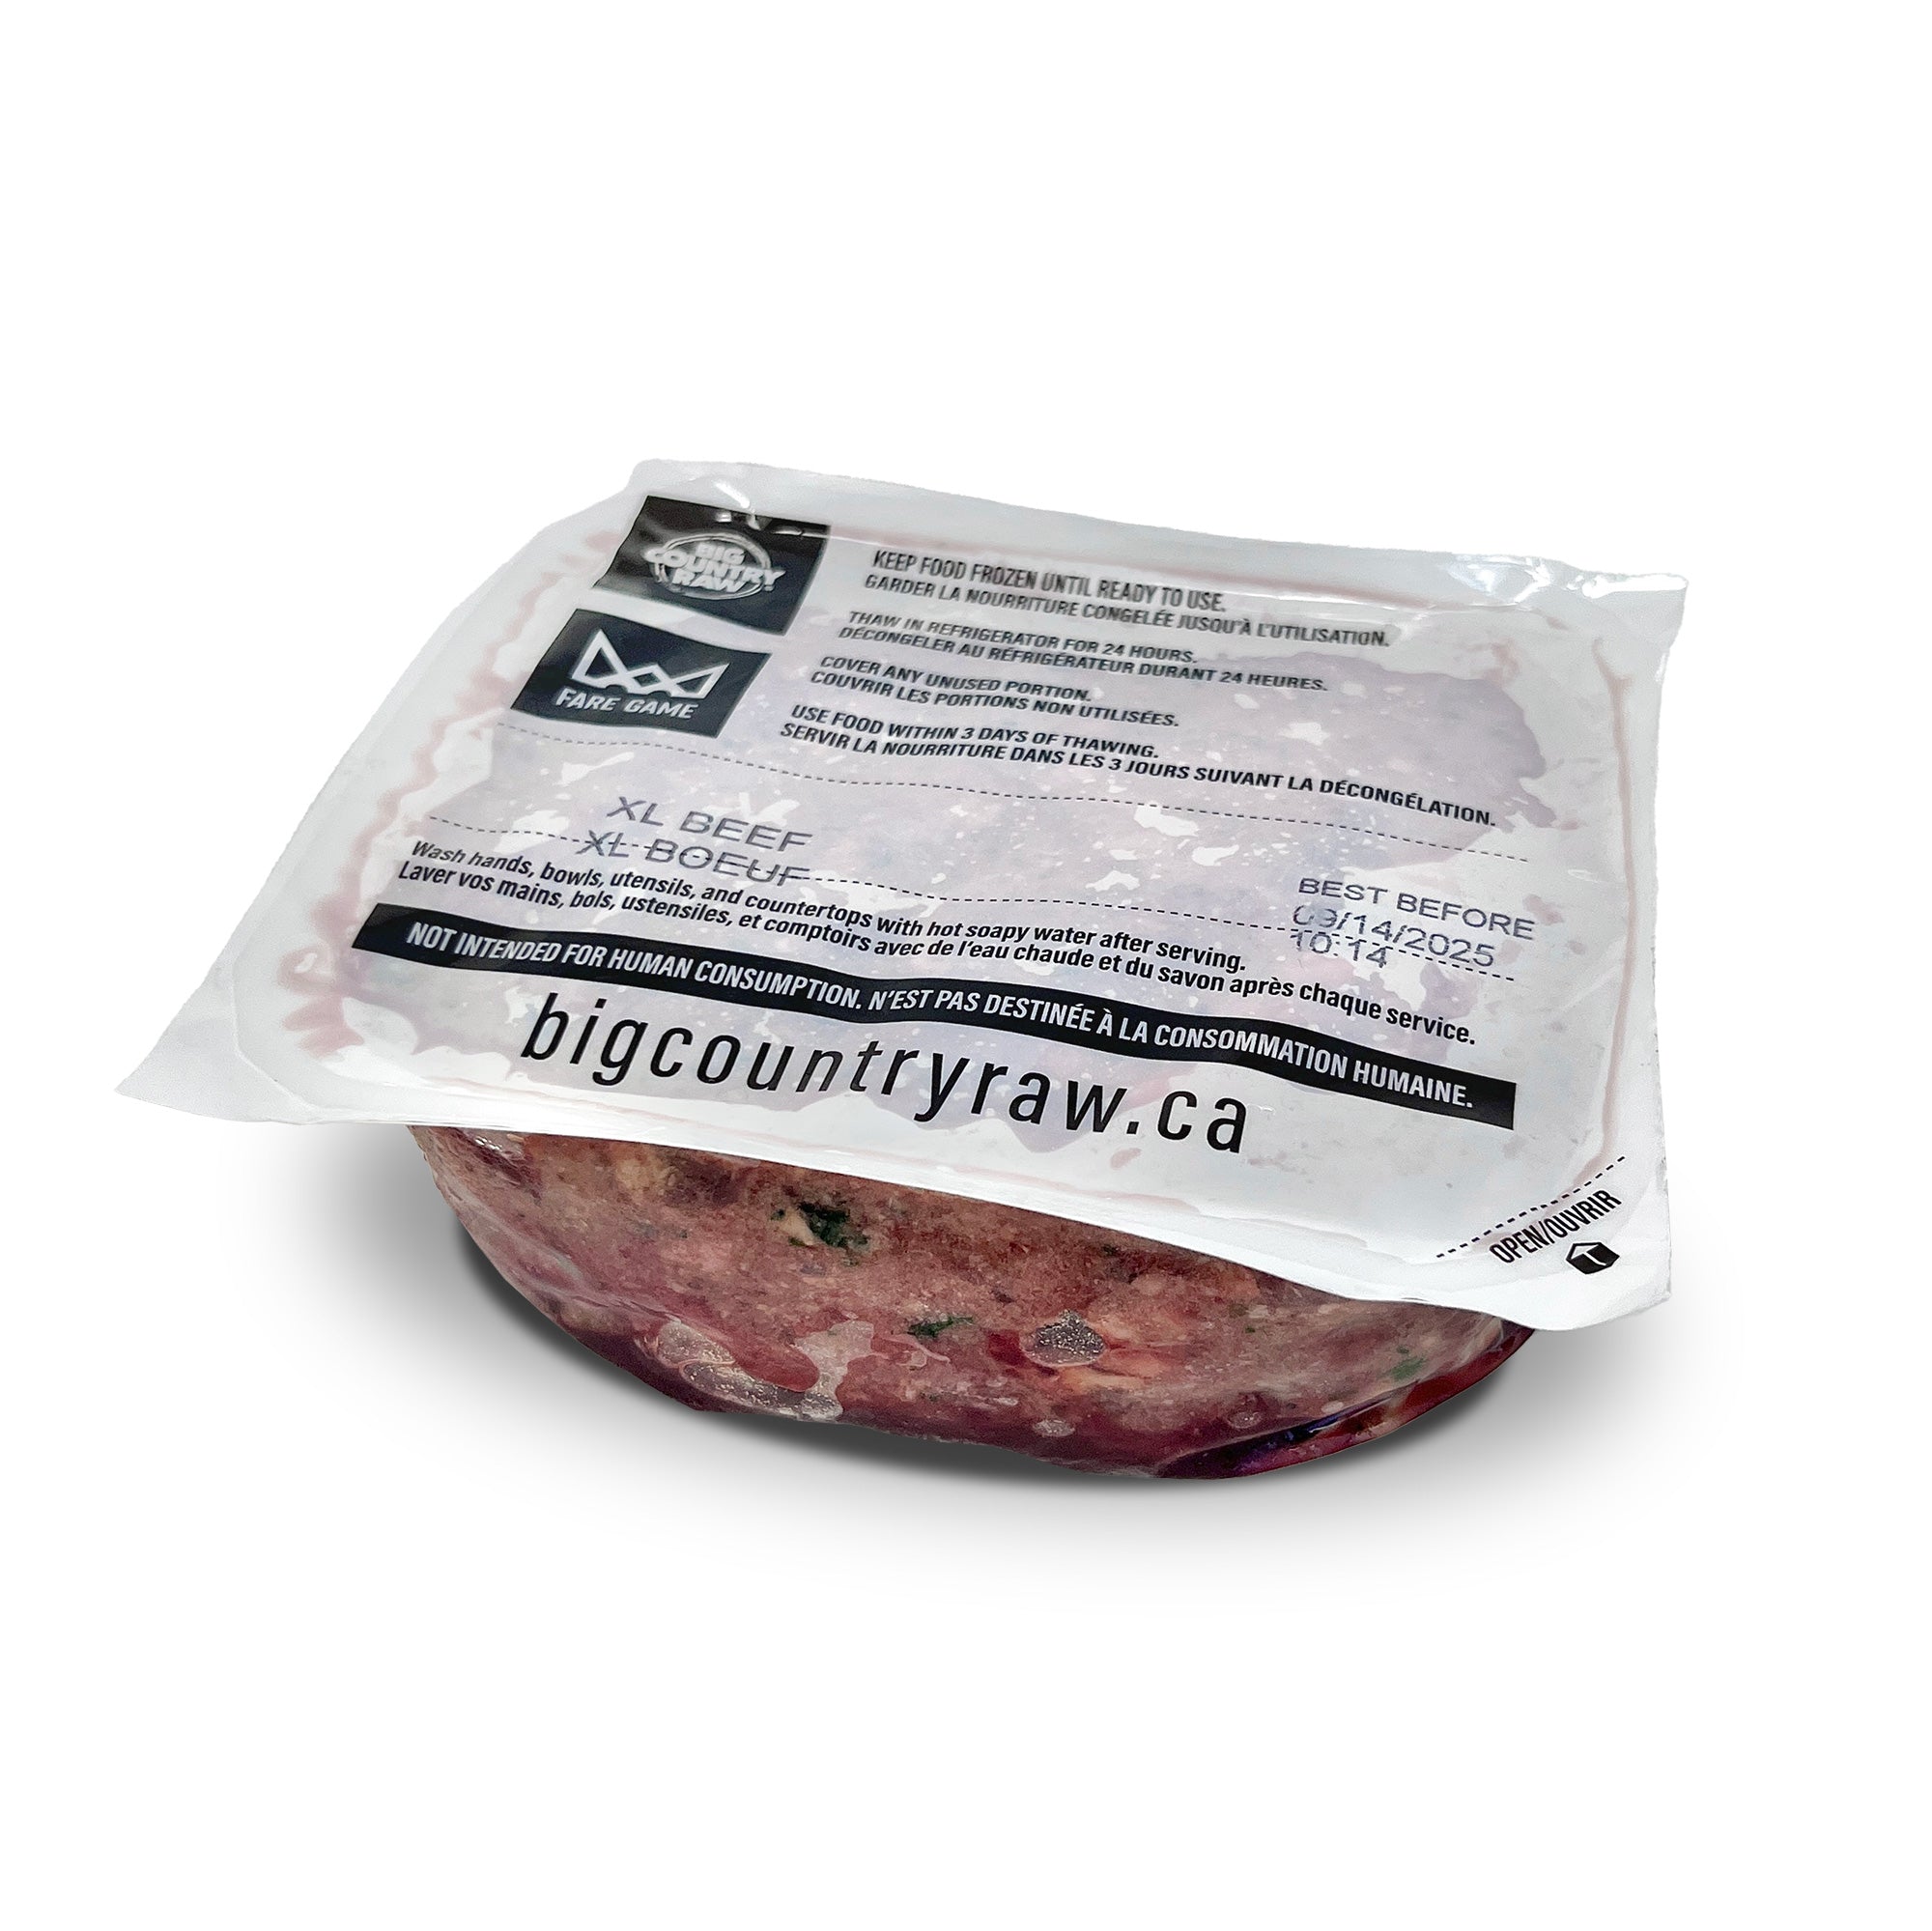 Big Country Raw - XL Beef (30lb) - Frozen Product